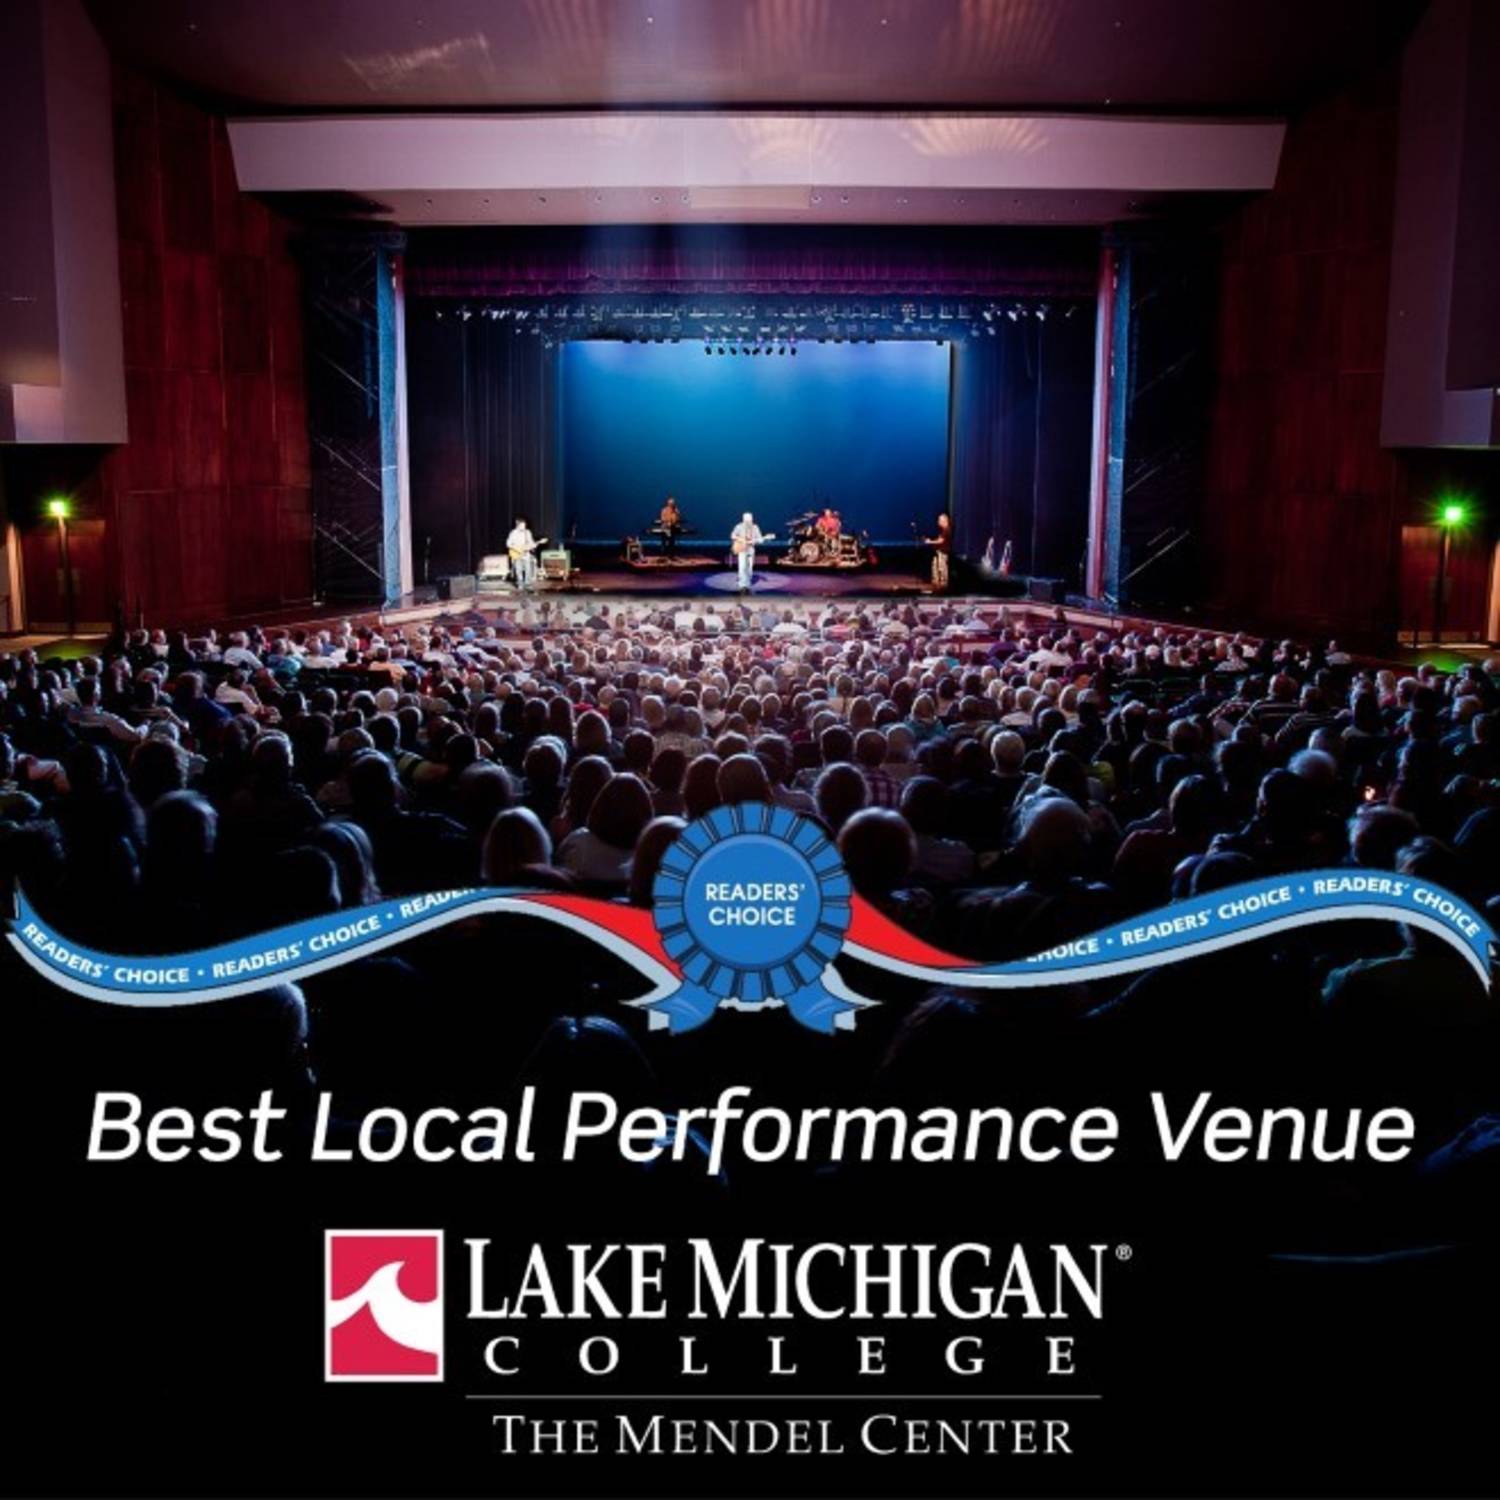 Readers' Choice for Best Local Performance Venue